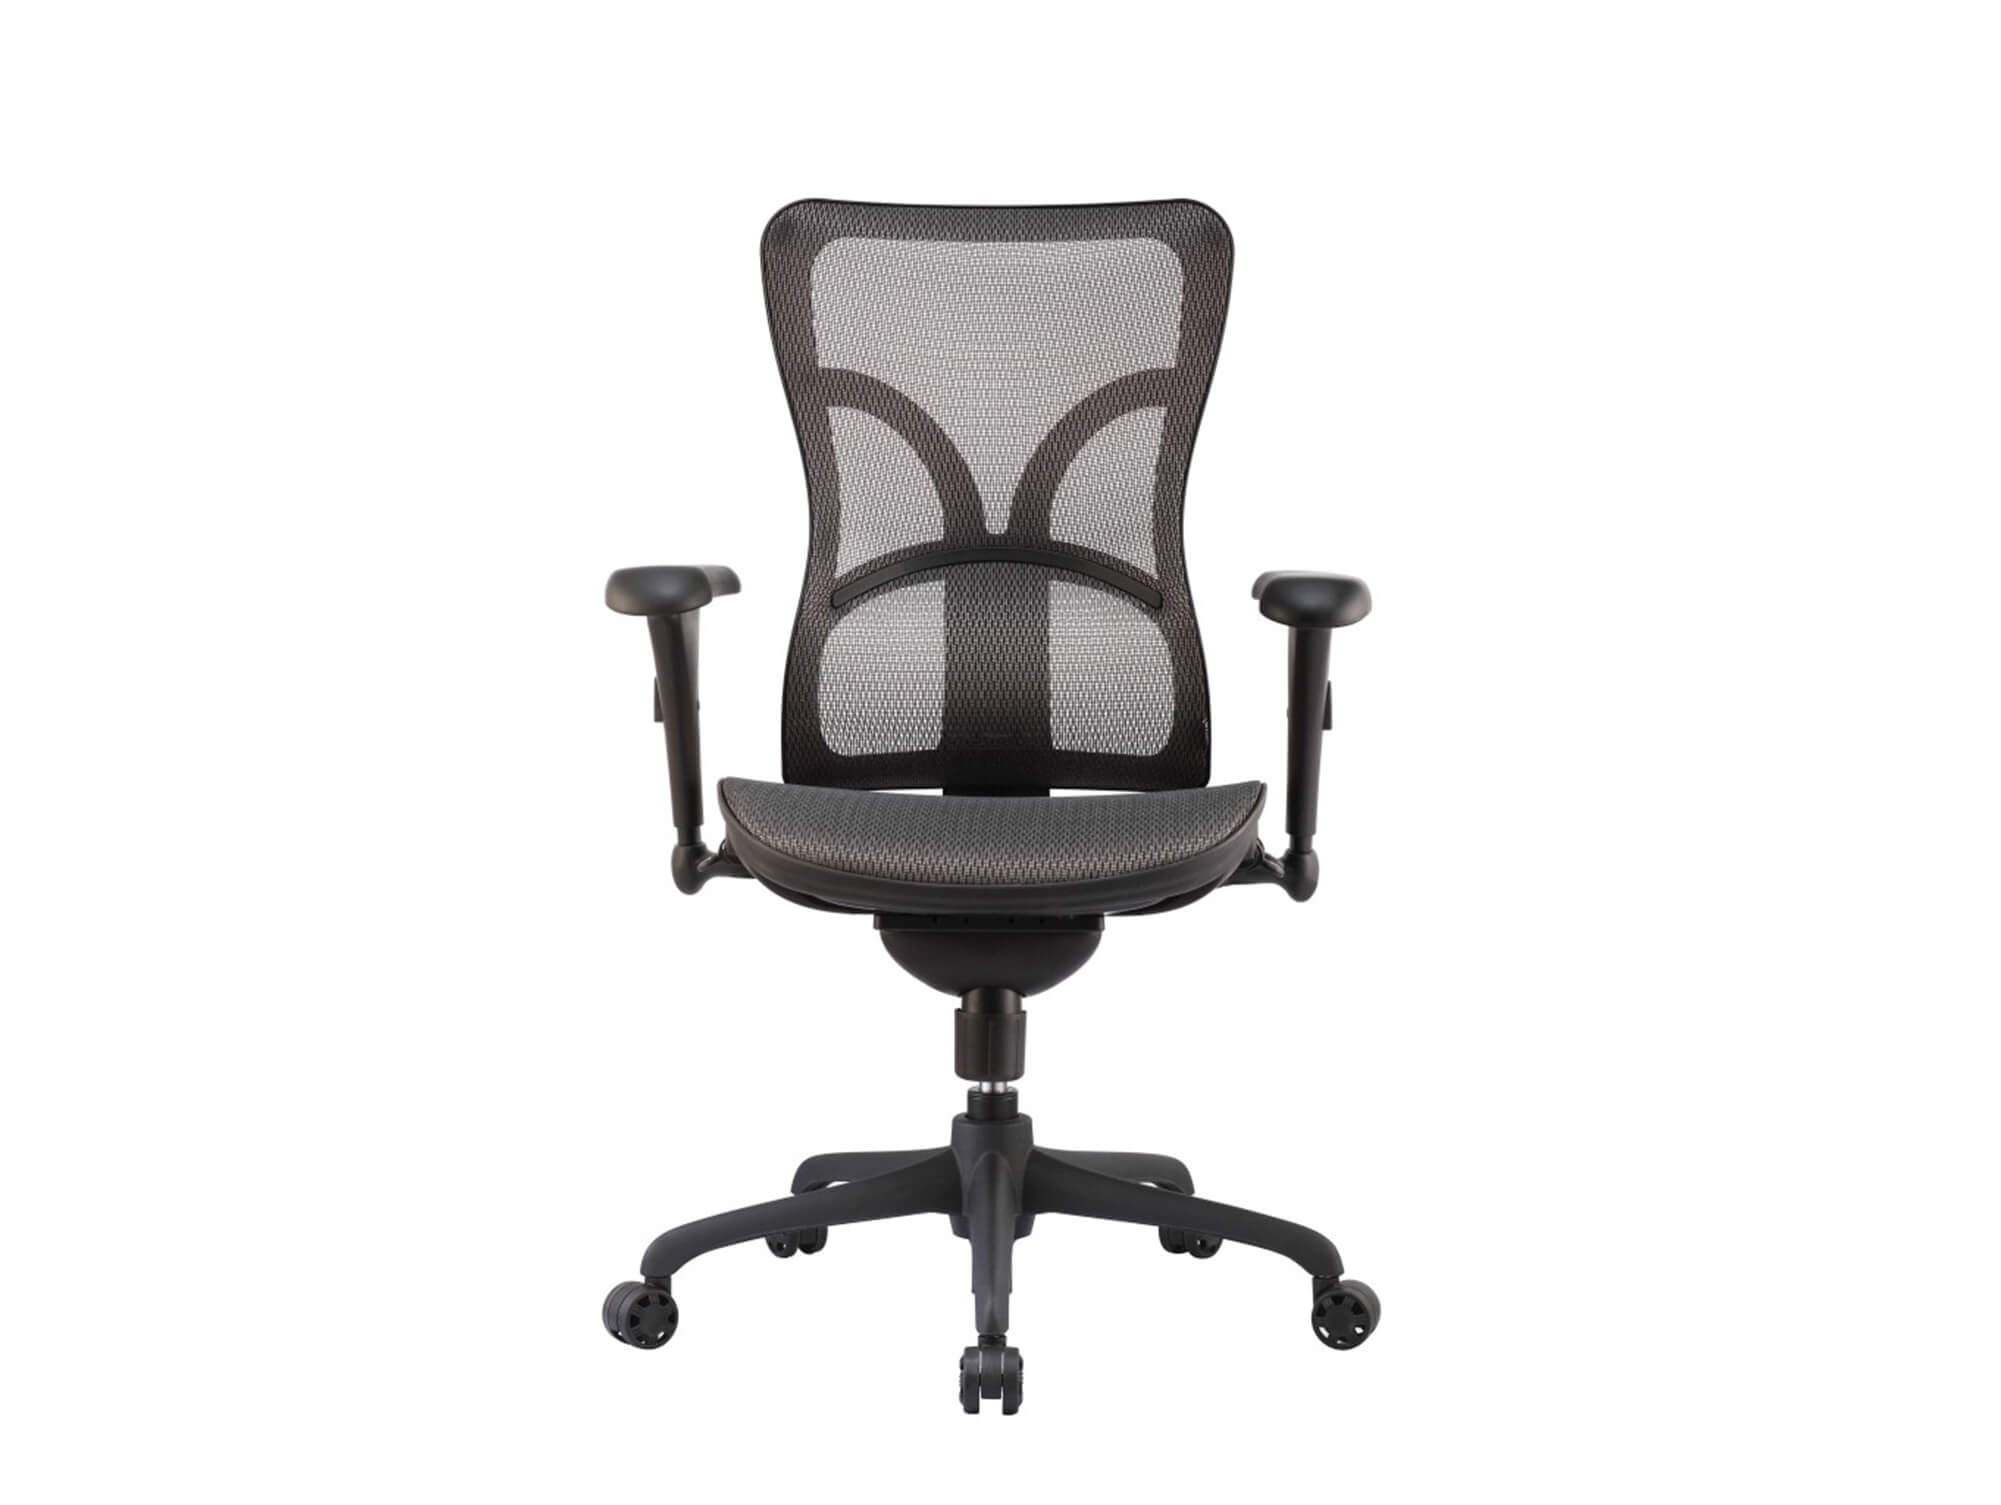 Adjustable office chair front